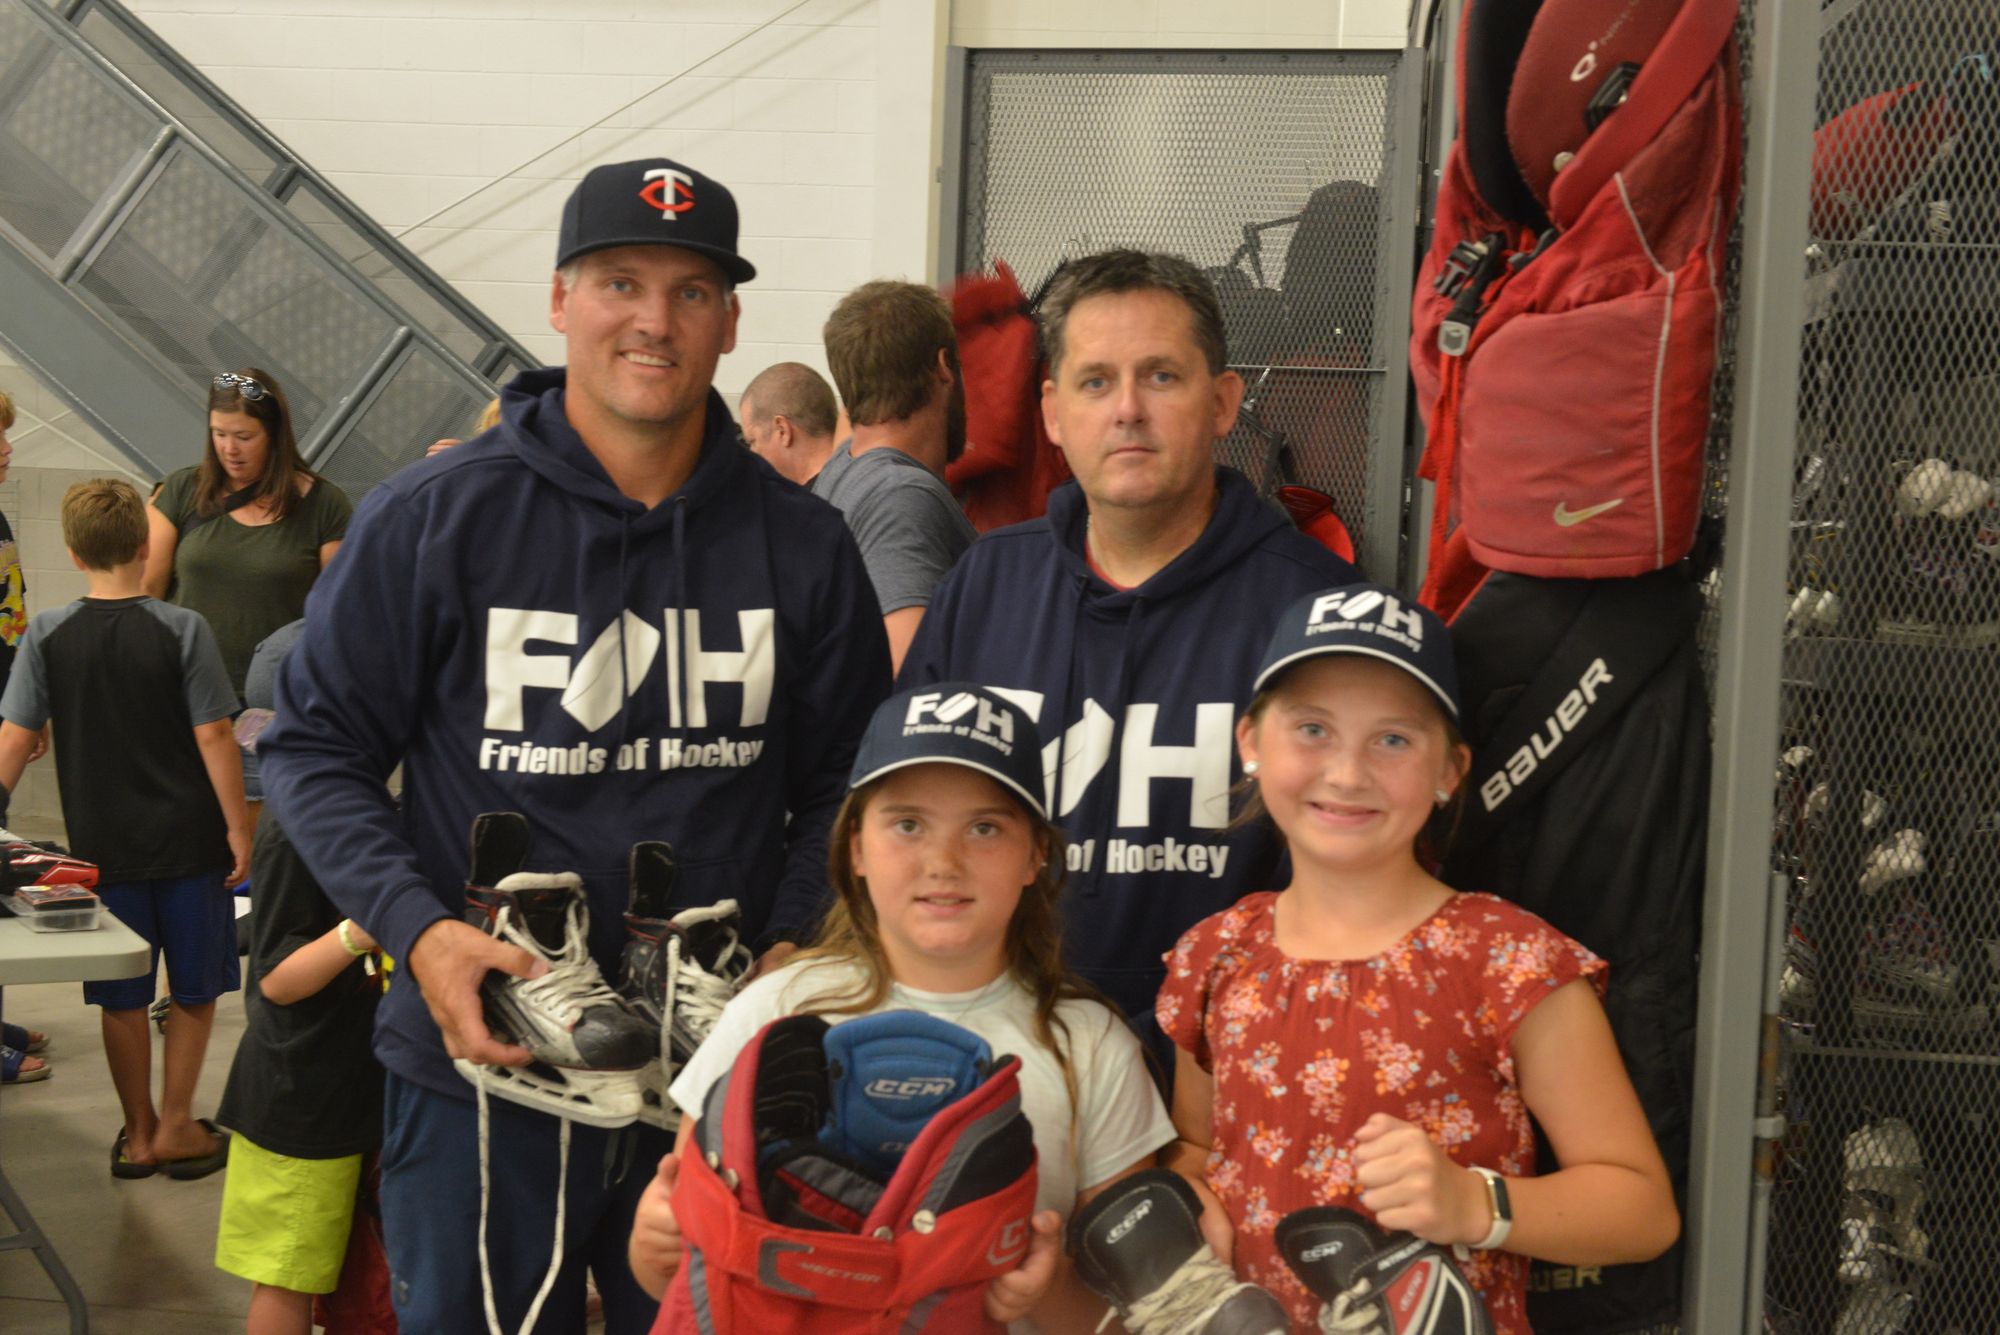 Rising costs increase demand for Friends of Hockey program